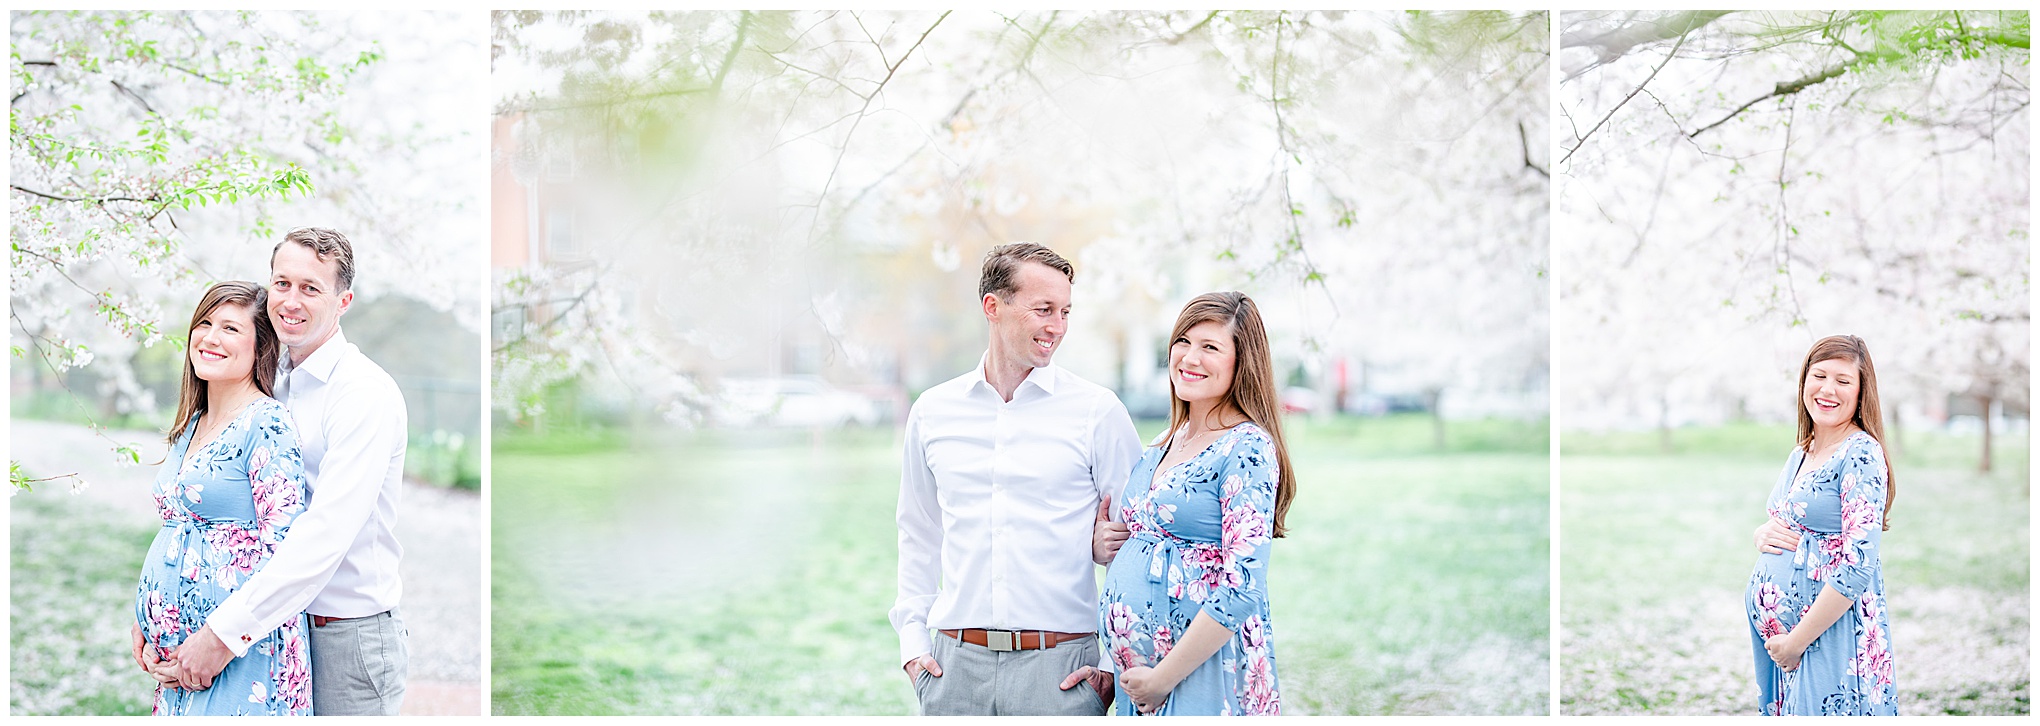 DC cherry blossoms maternity session, D.C. photos, spring maternity photos, sunrise maternity photos, DC sunrise, DC maternity photos, cherry blossoms maternity photos, Rachel E.H. Photography, maternity session style, maternity photos outfit ideas, Rose Park, Georgetown maternity photos